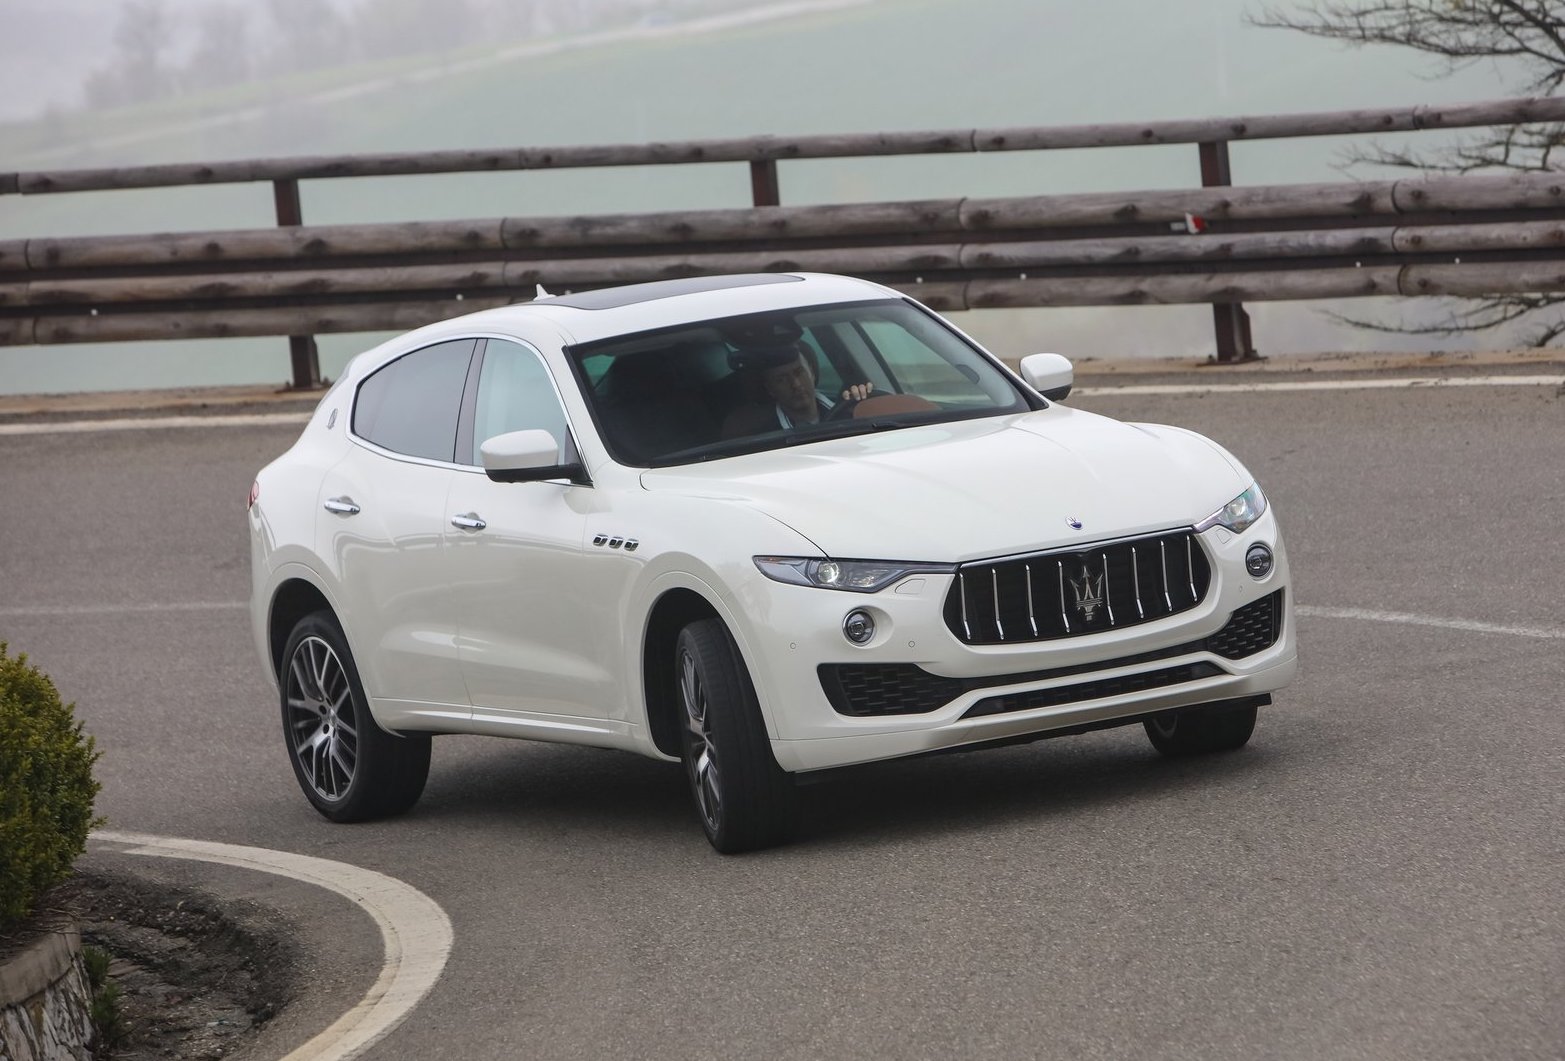 Maserati demand slowing, causes extended production stops – report